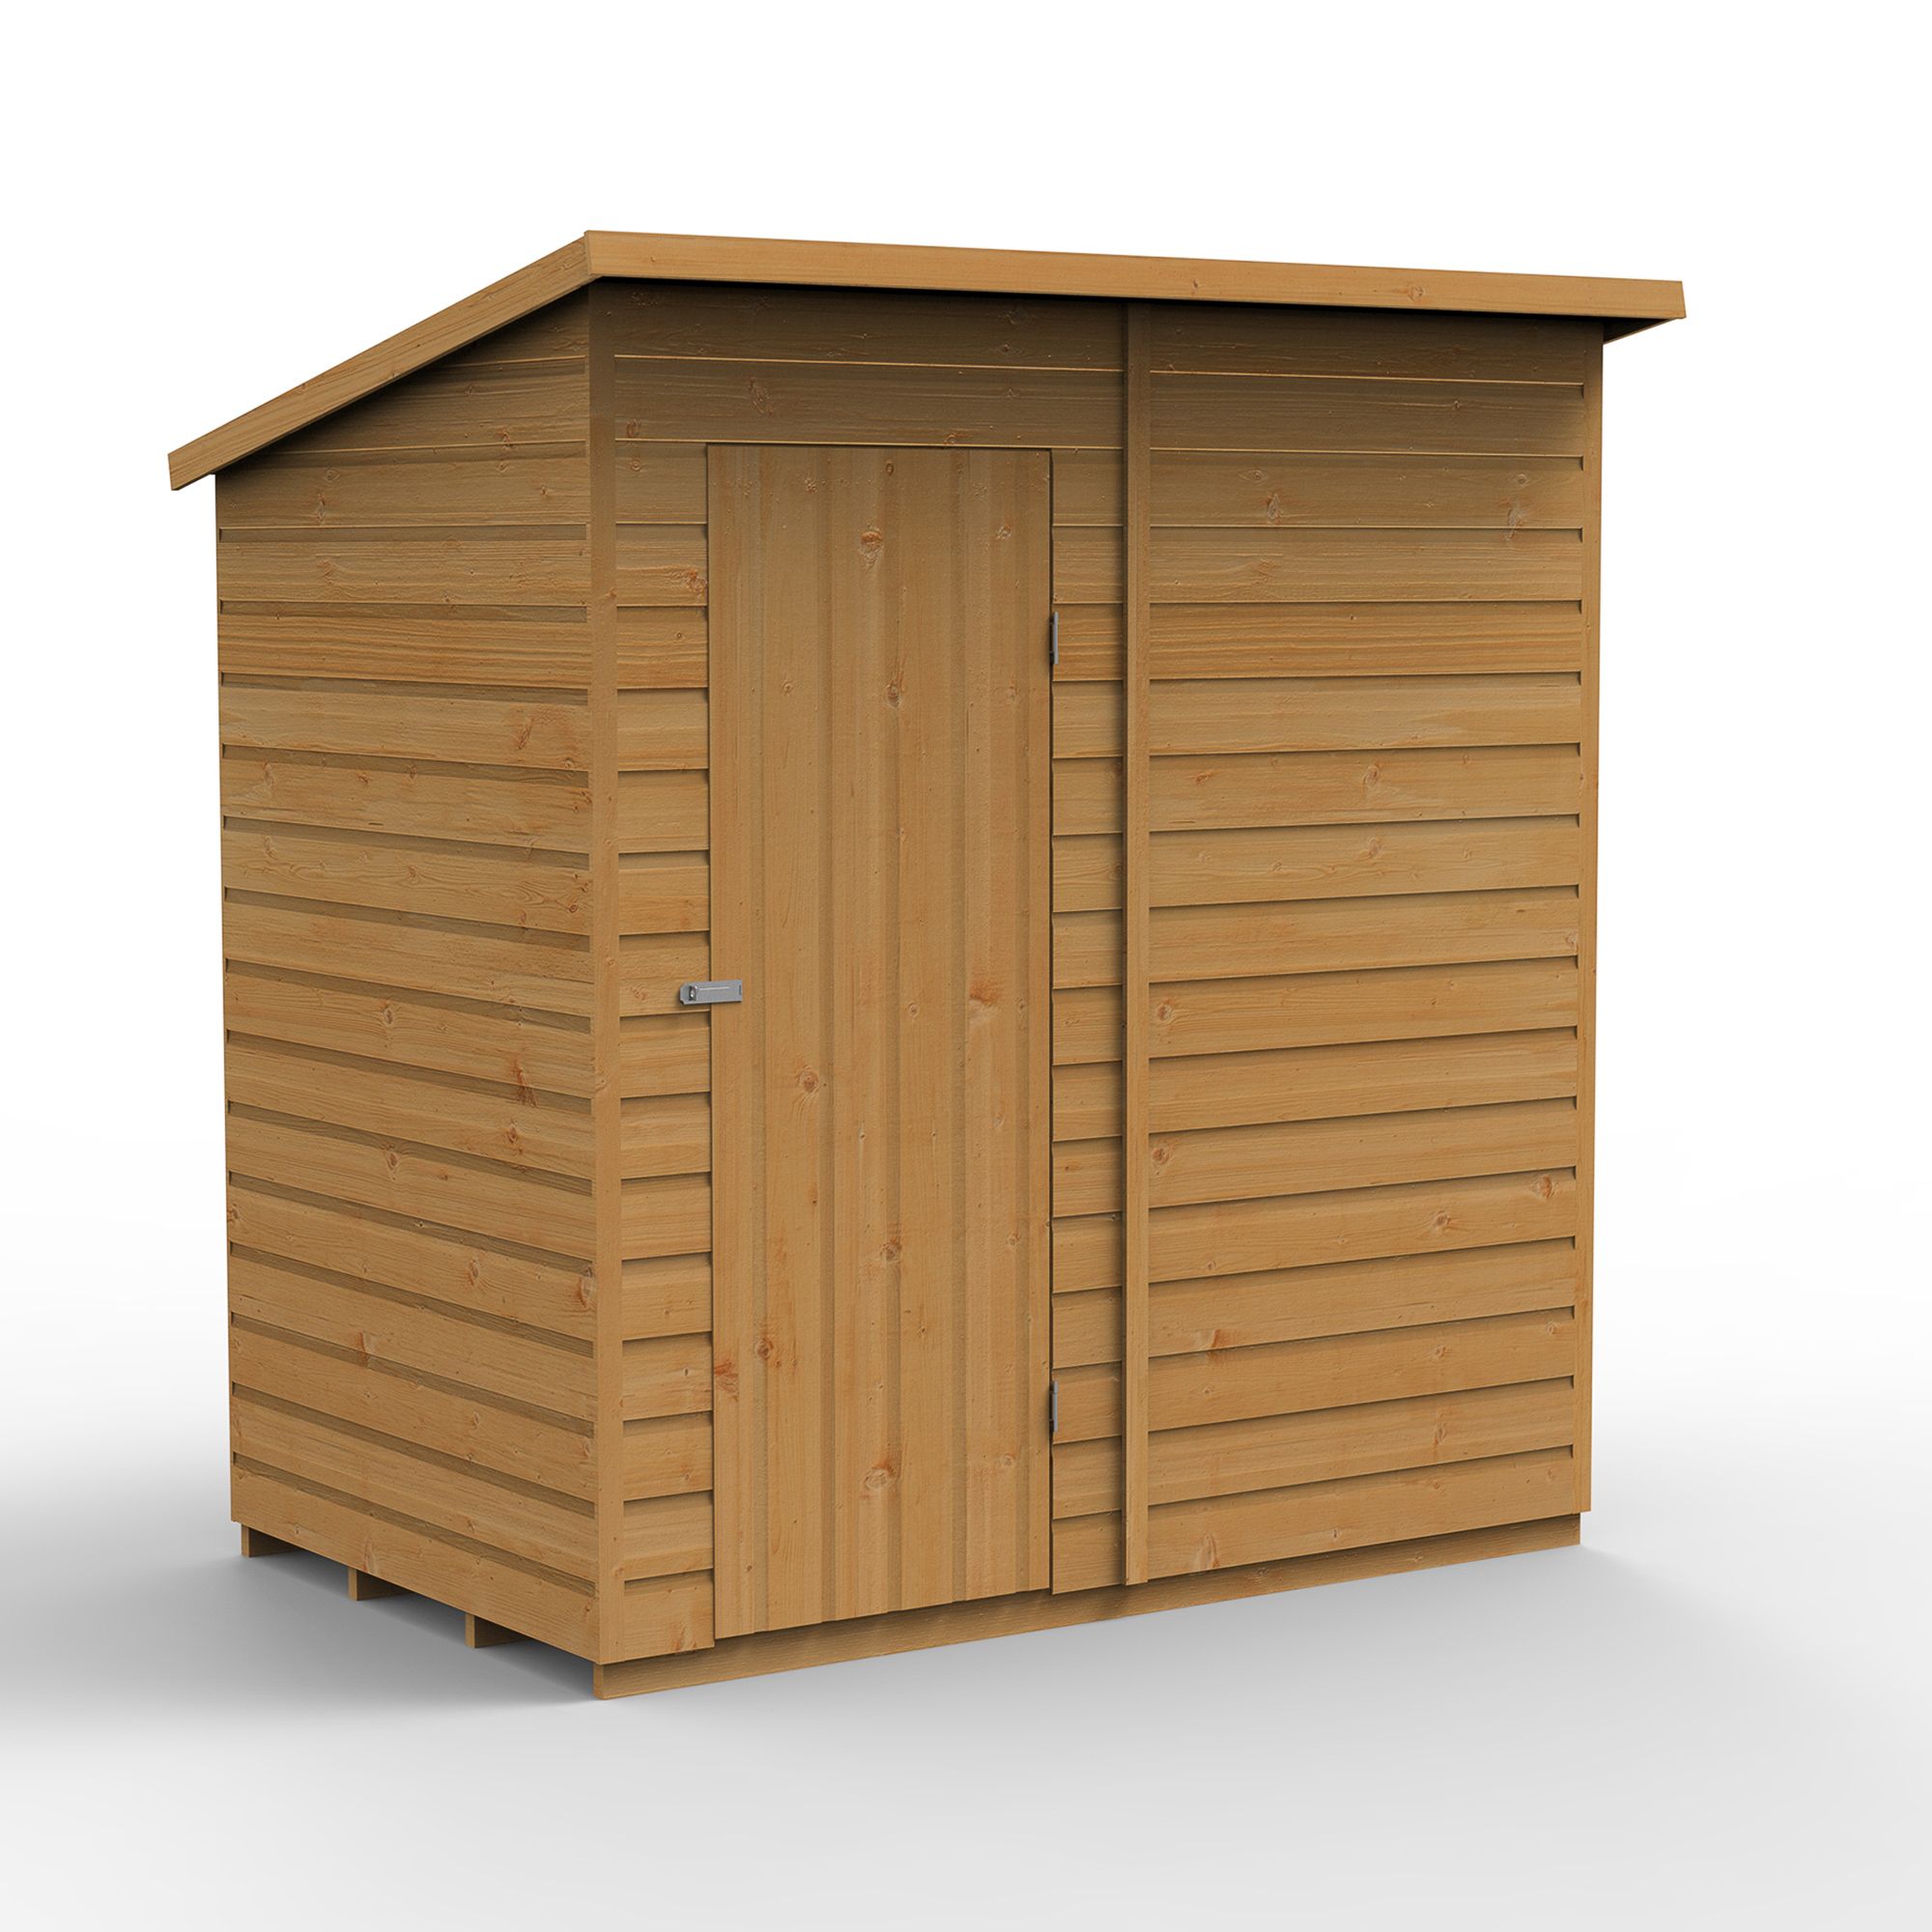 Forest Garden Shiplap 6x4 ft Pent Wooden Shed with floor (Base included) - Assembly service included